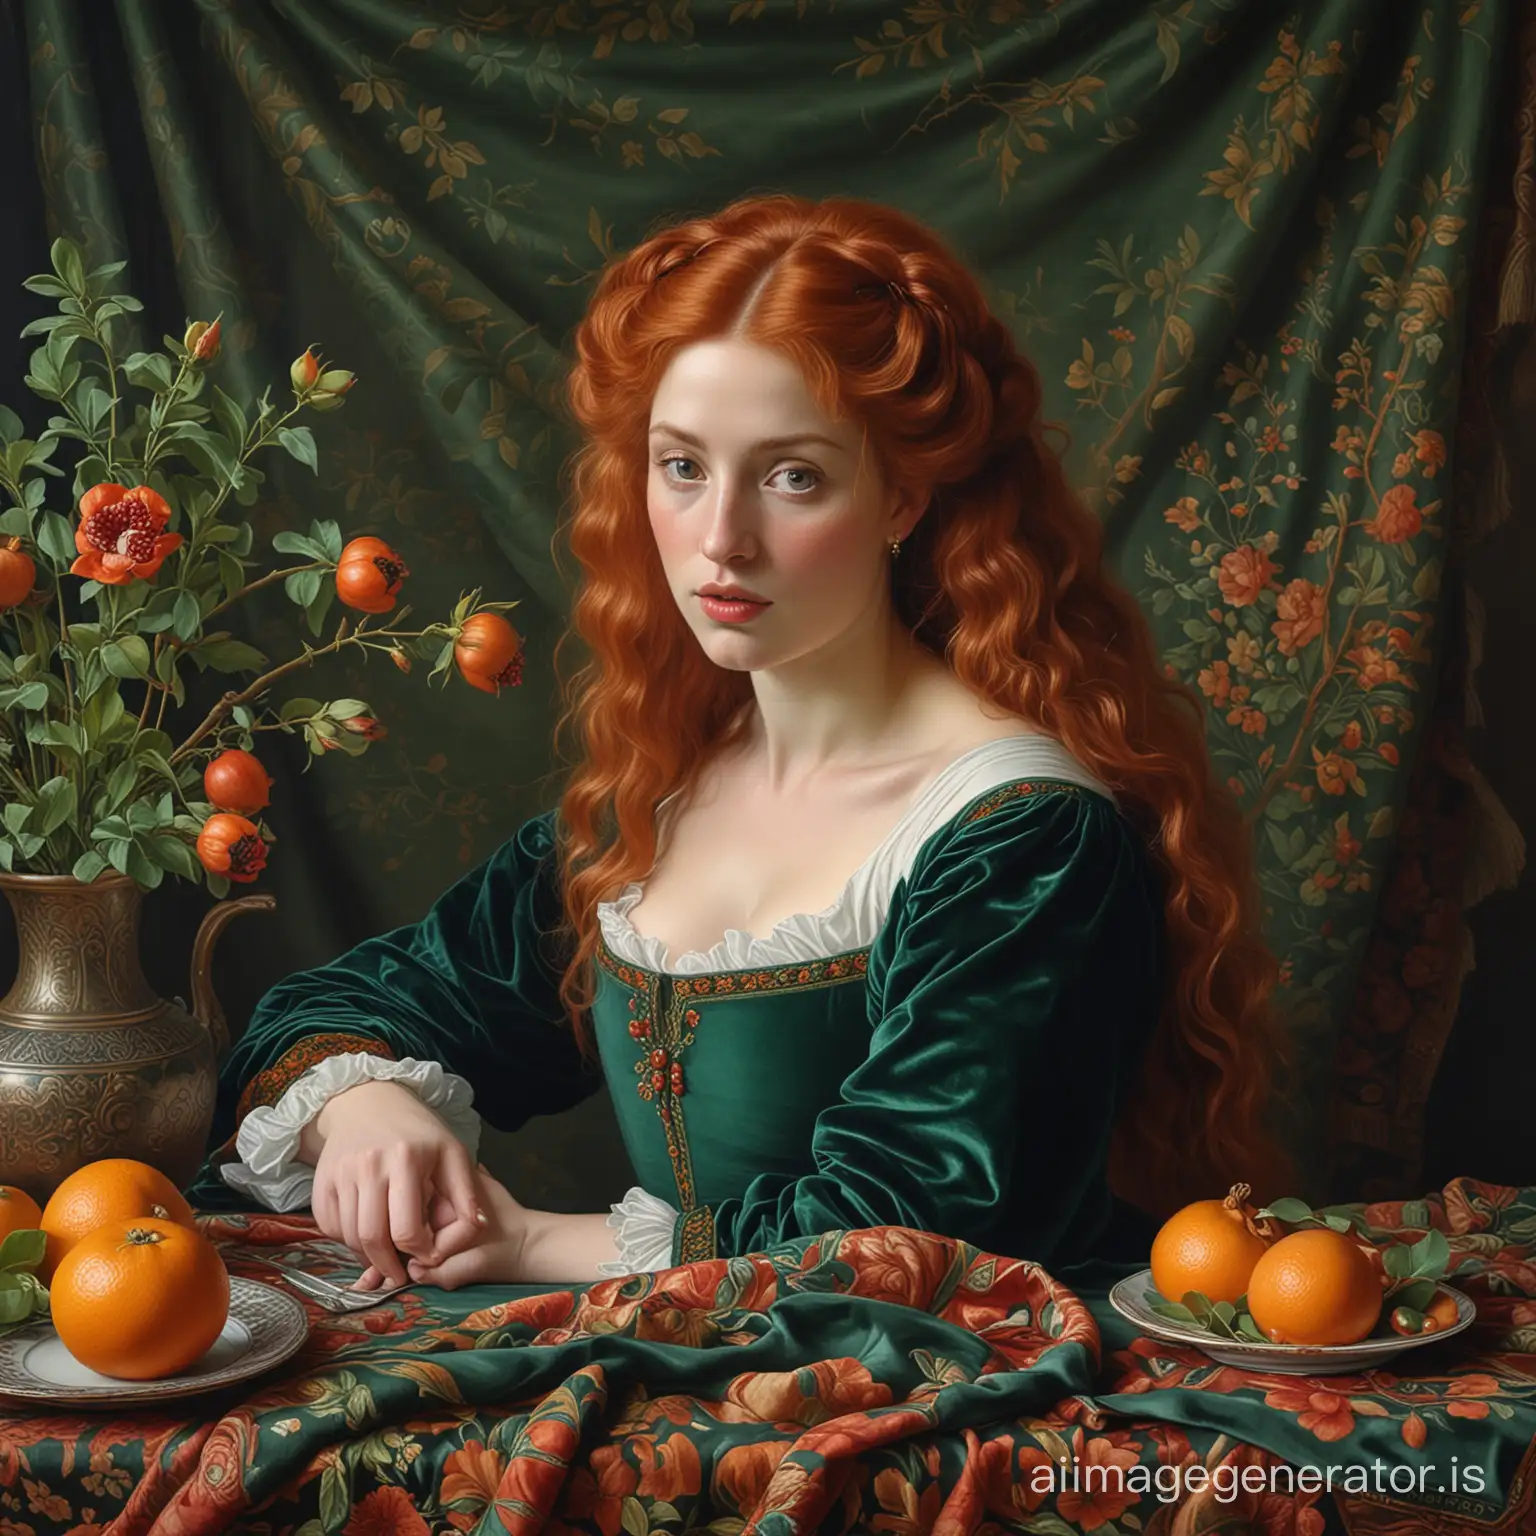 A masterpiece of Pre-Raphaelite painting, a large red-haired woman of about 40 with large facial features, thick lips, hair tied at the back of her head, in a dark green velvet dress sits at a small table, hands are depicted perfectly, a magnificent tapestry tablecloth is laid on the table in front of her, lies without vases blooming rosehip branch, orange, pomegranate, complex dramatic lighting, masterpiece of composition, oil on canvas, brush strokes, Pre-Raphaelite painting